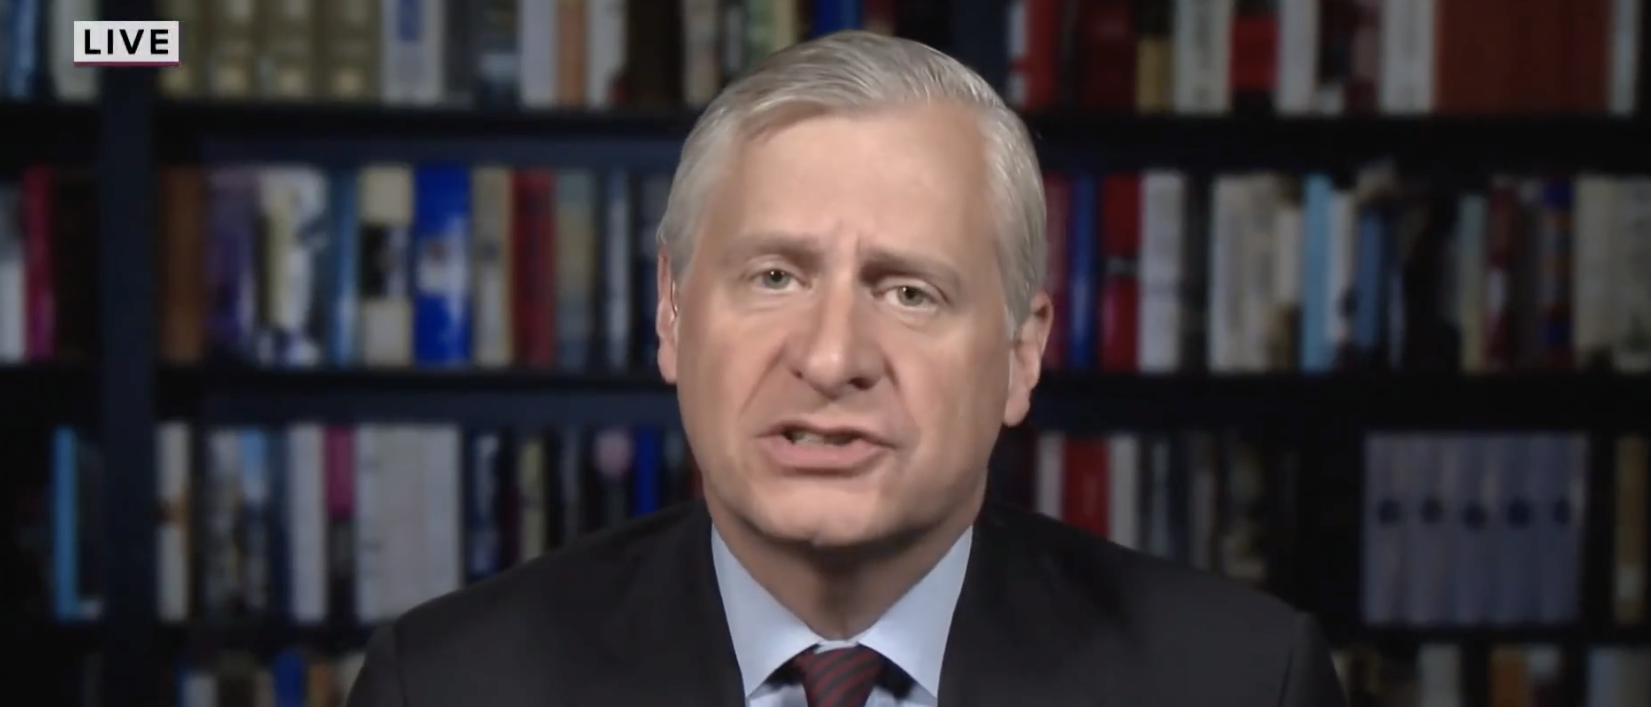 And There Was Light by Jon Meacham